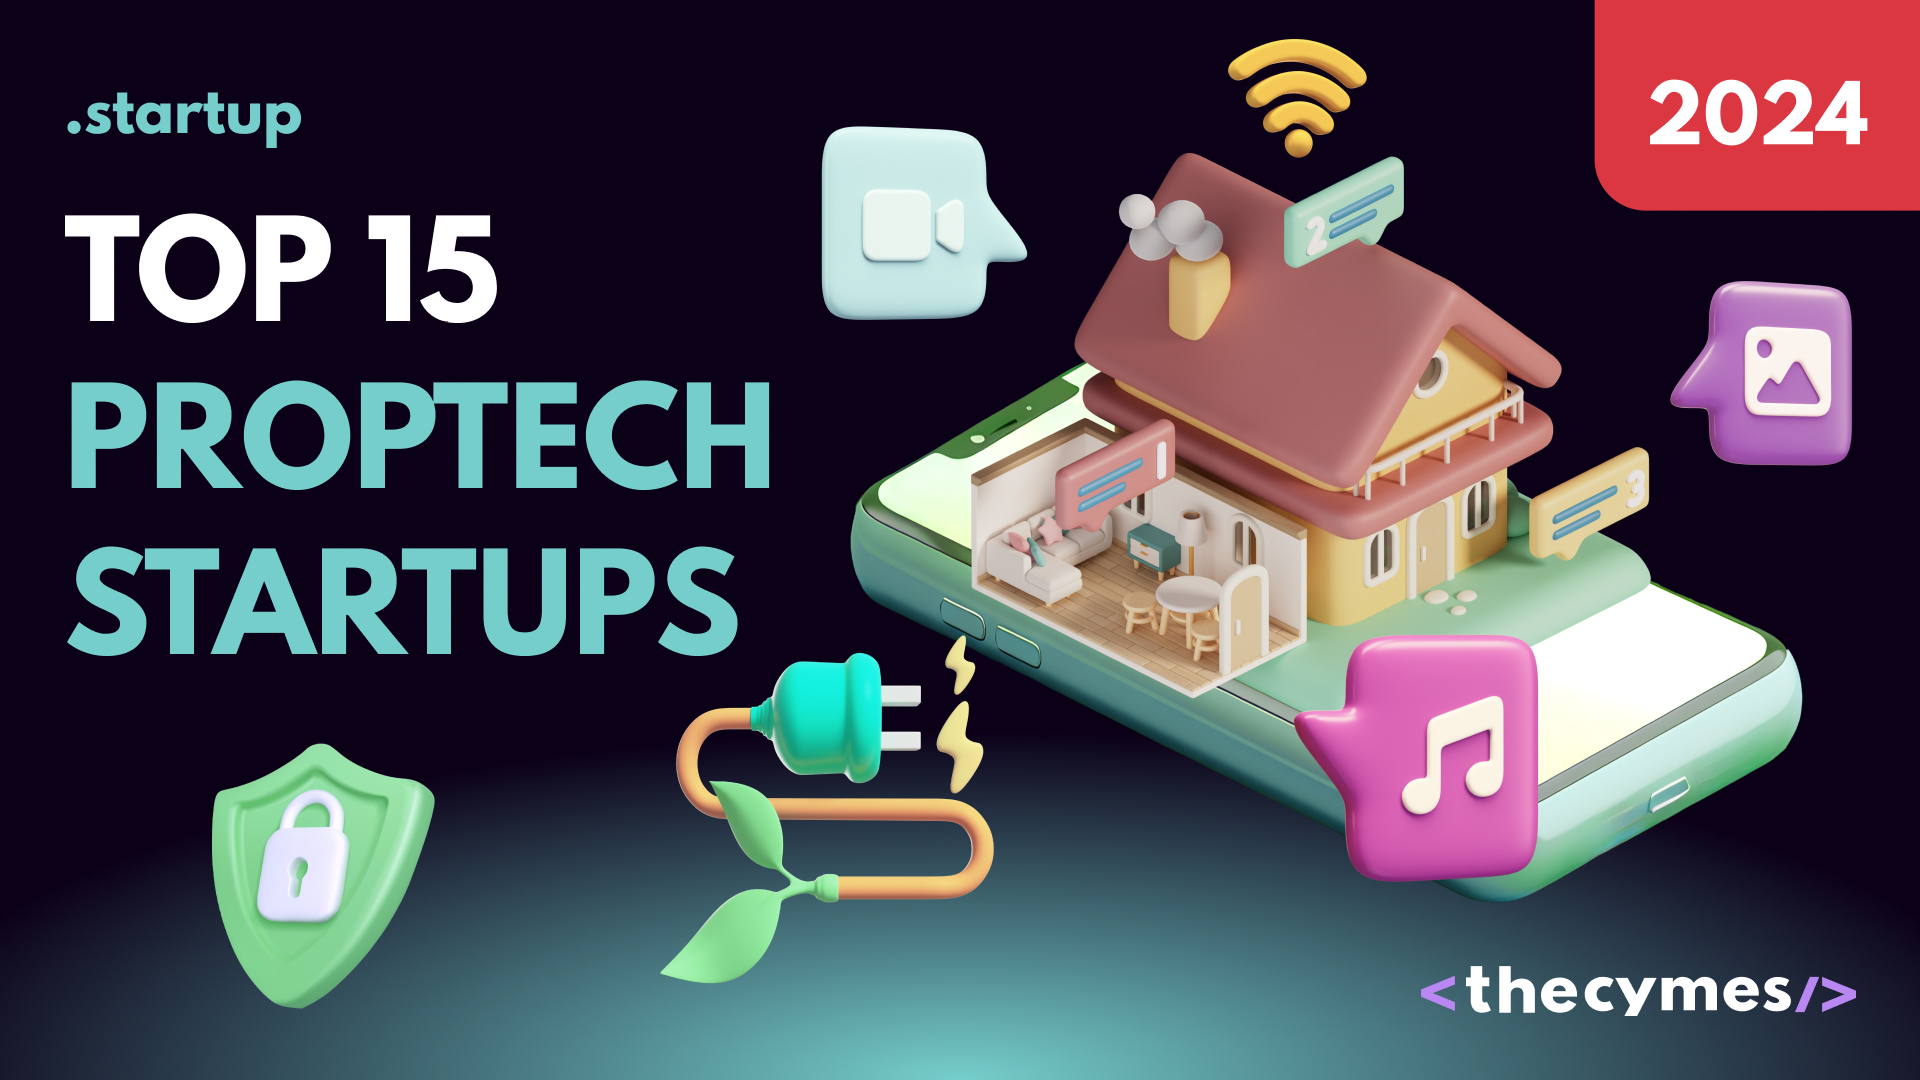 Top 15 Proptech Startups In 2024 cover